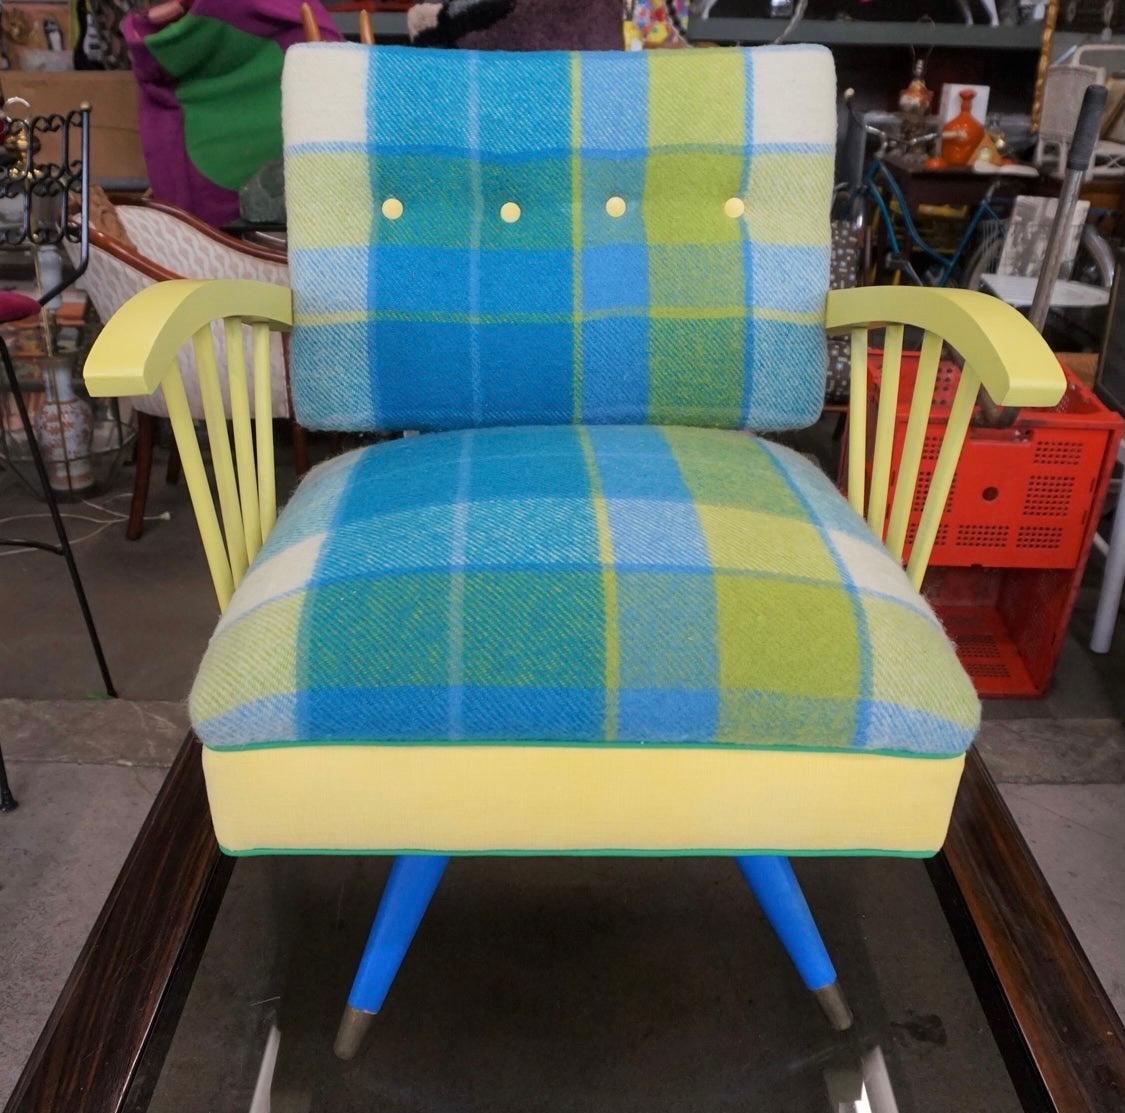 This 1950s hermitage cabinet shop chair has been reupholstered in a Pendleton wool fabric for the seat and back and Kelly green piping as well as a lush yellow velvet. The frame has some minor age appropriate wear.
A true statement piece.